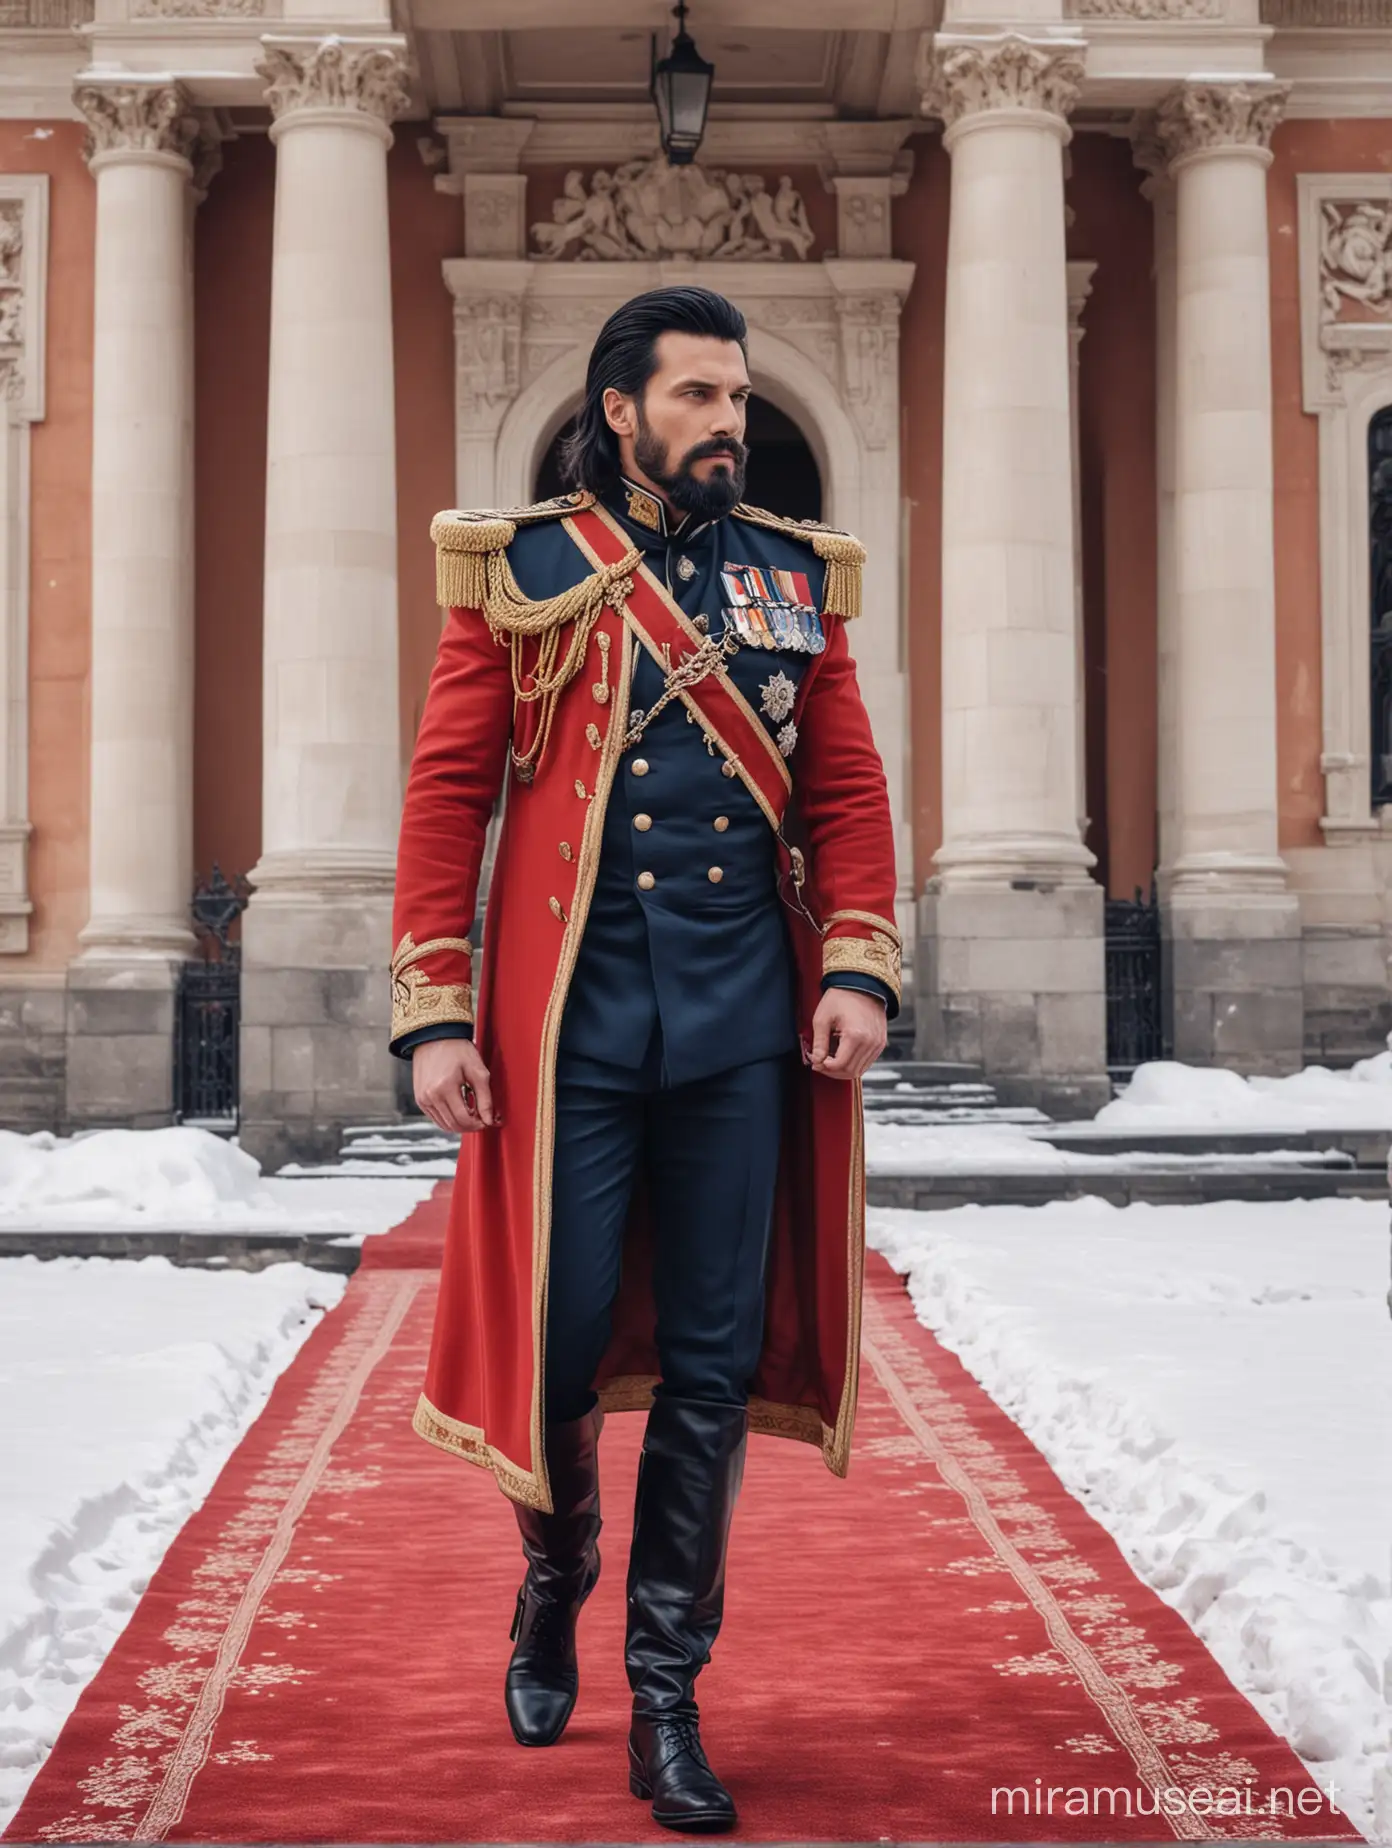 Regal King in Navy Cavalry Suit Walking Out of Snowy Palace